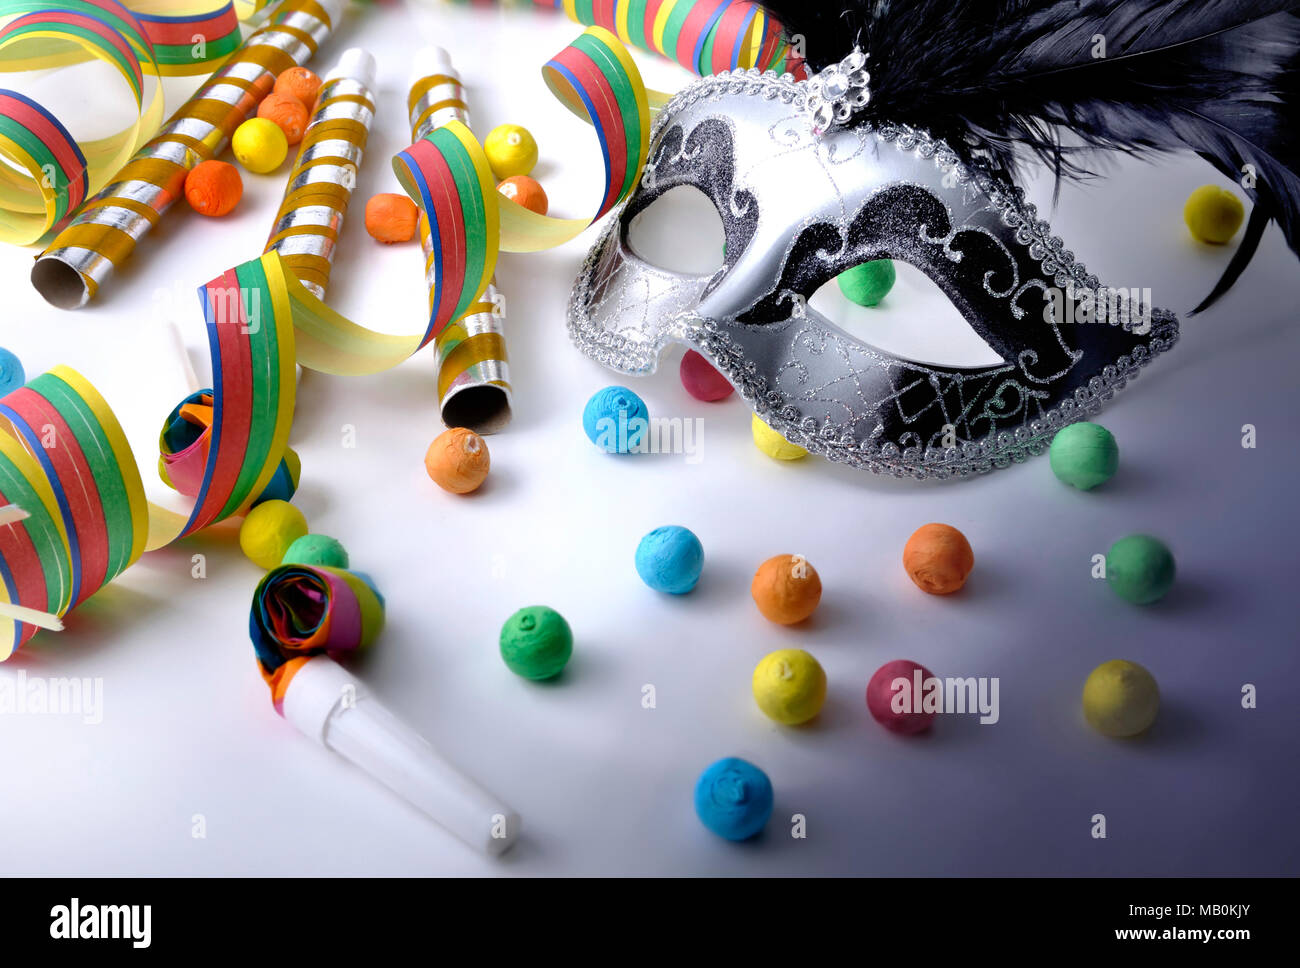 Colorful Cotillons for Party on White Stock Photo - Image of